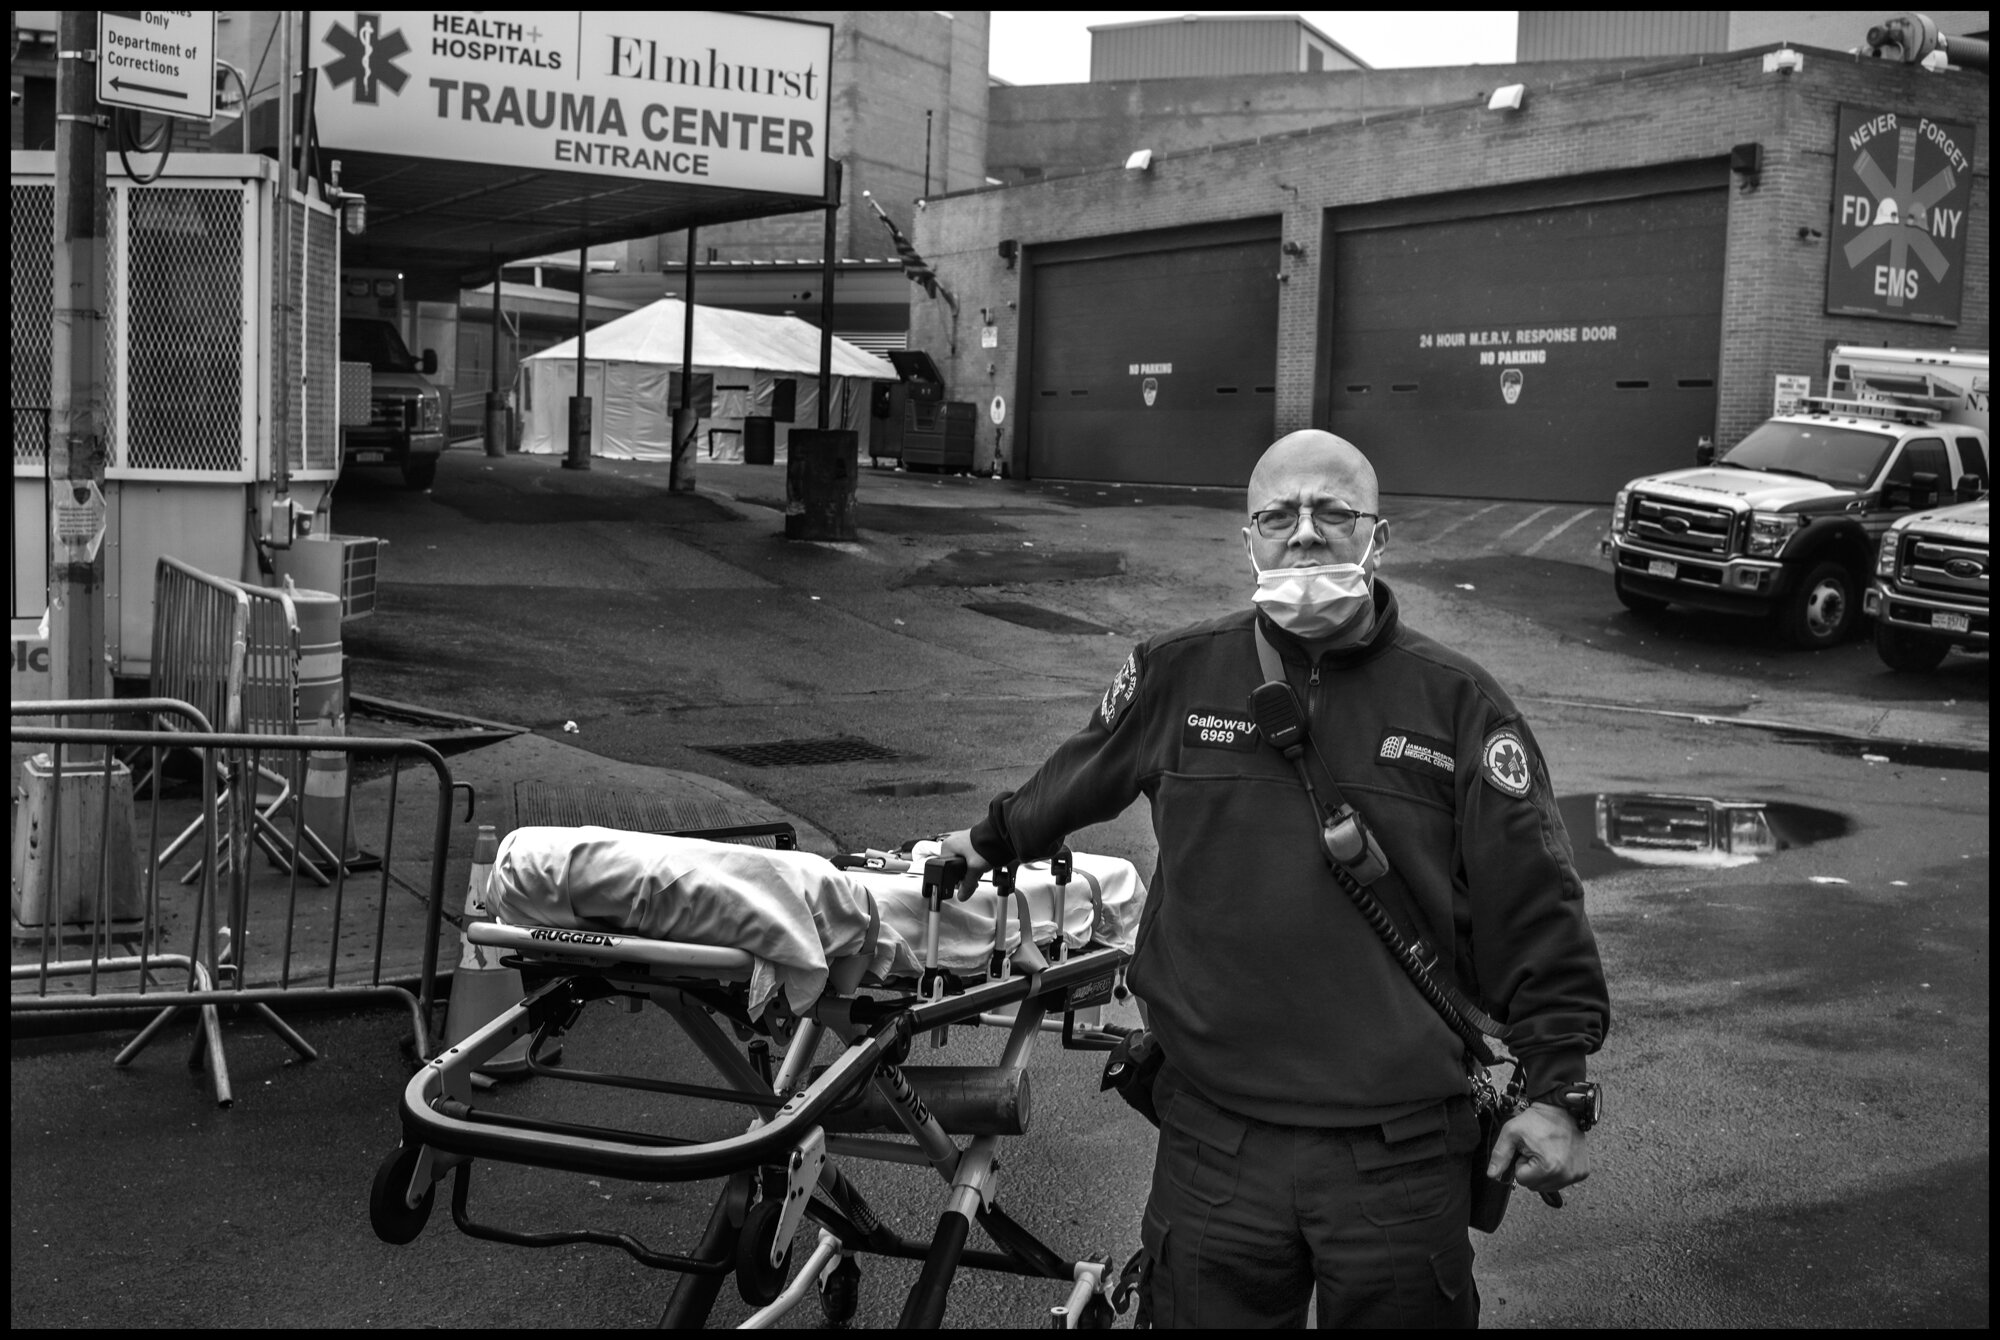  Mike Galloway,&nbsp;ambulance medic.  March 29, 2020. © Peter Turnley  ID# 07-012 